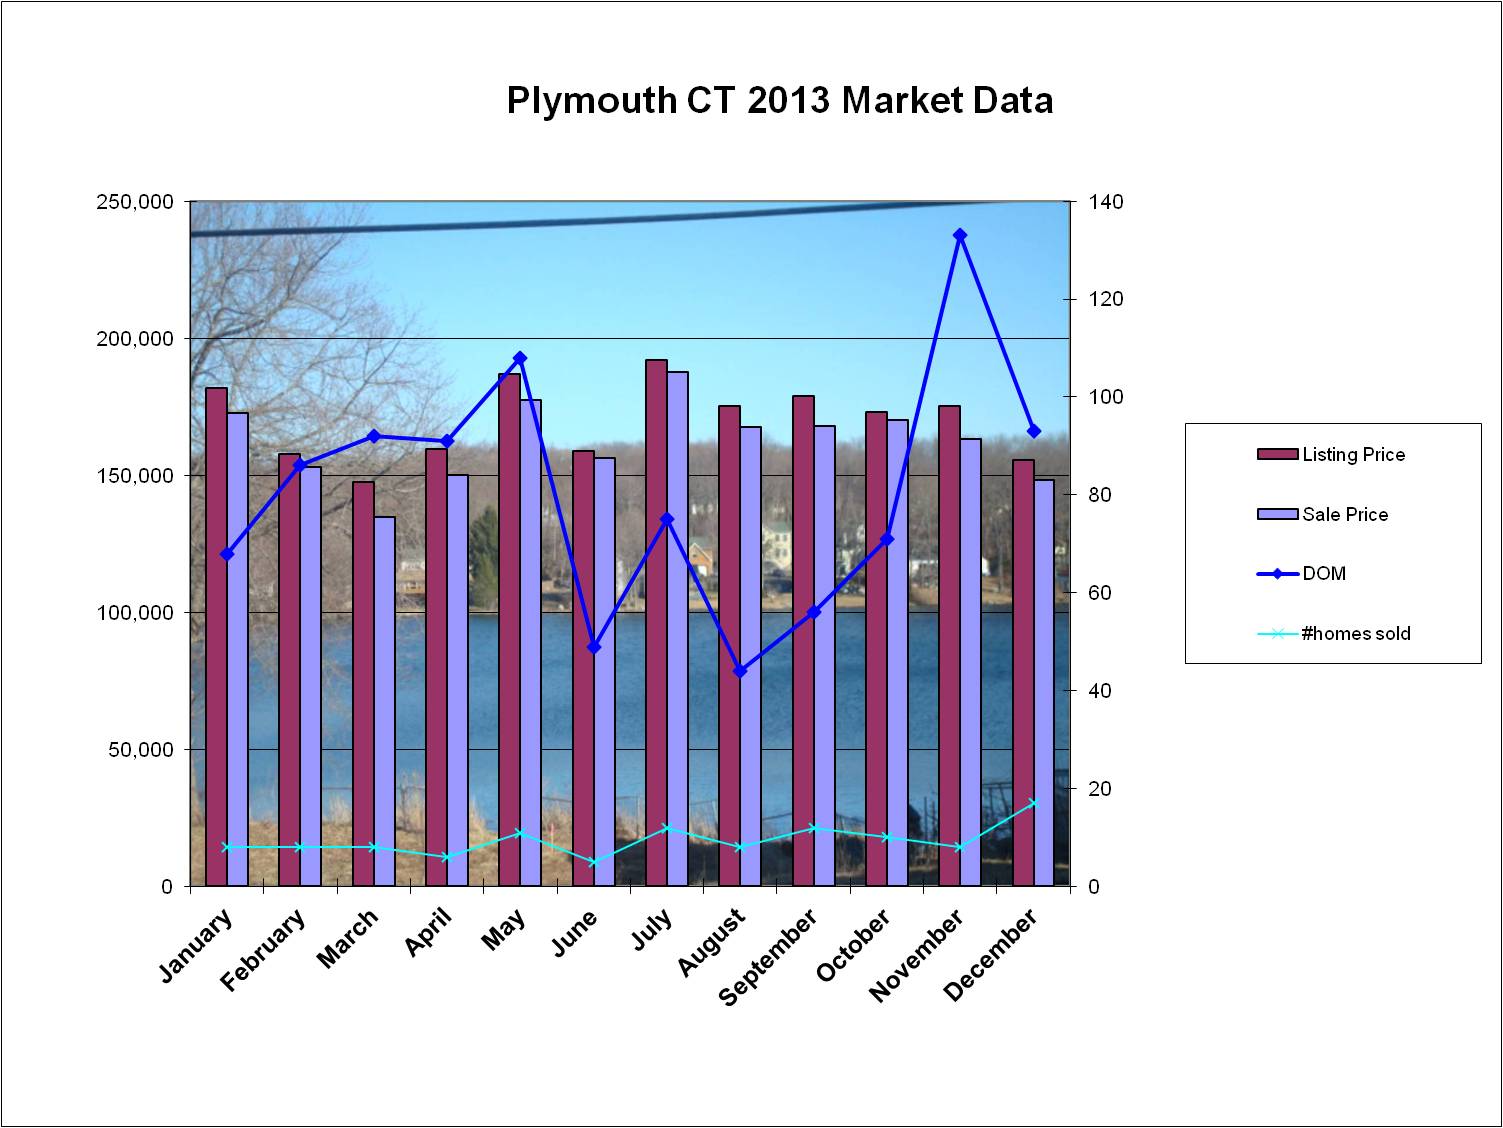 Plymouth CT 2013 real estate market statistics